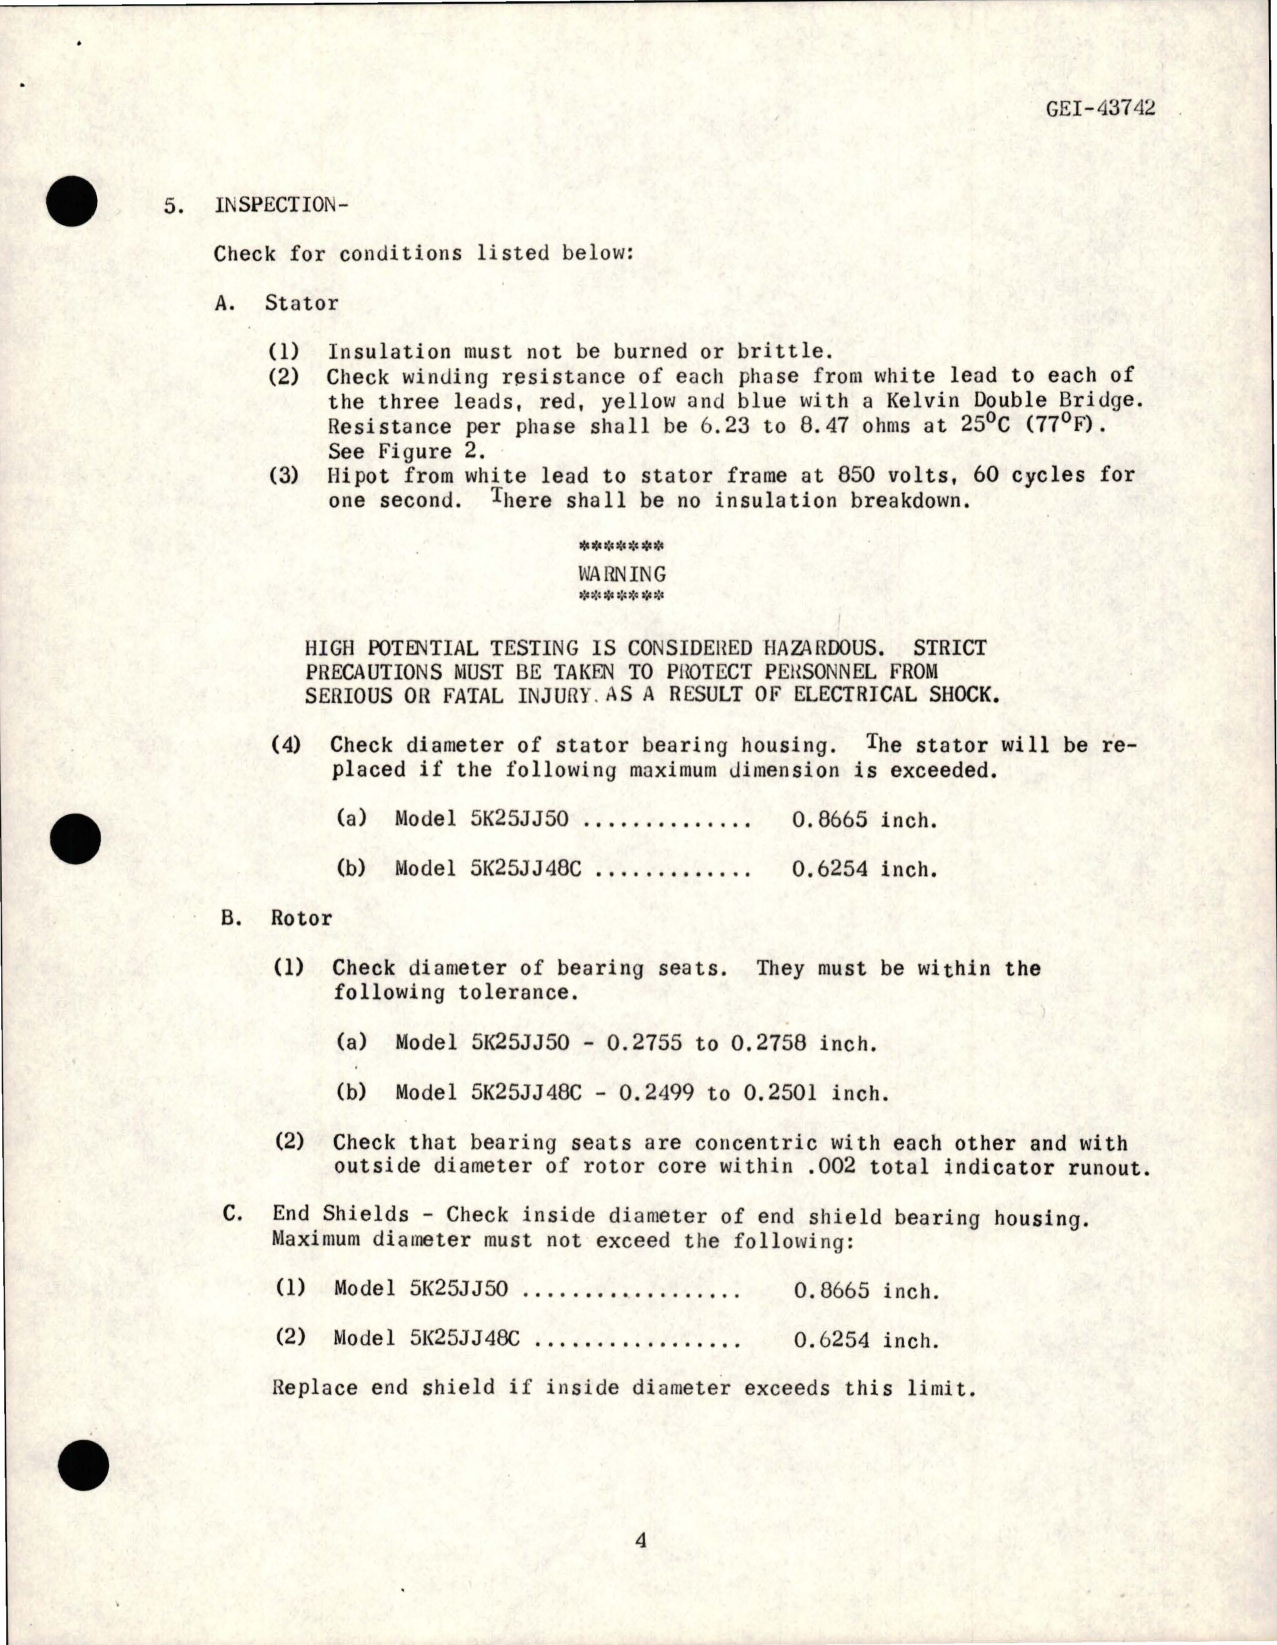 Sample page 5 from AirCorps Library document: Overhaul Instructions with Parts Breakdown for Alternating-Current Motors - Models 5K25JJ48C and 5K5JJ50